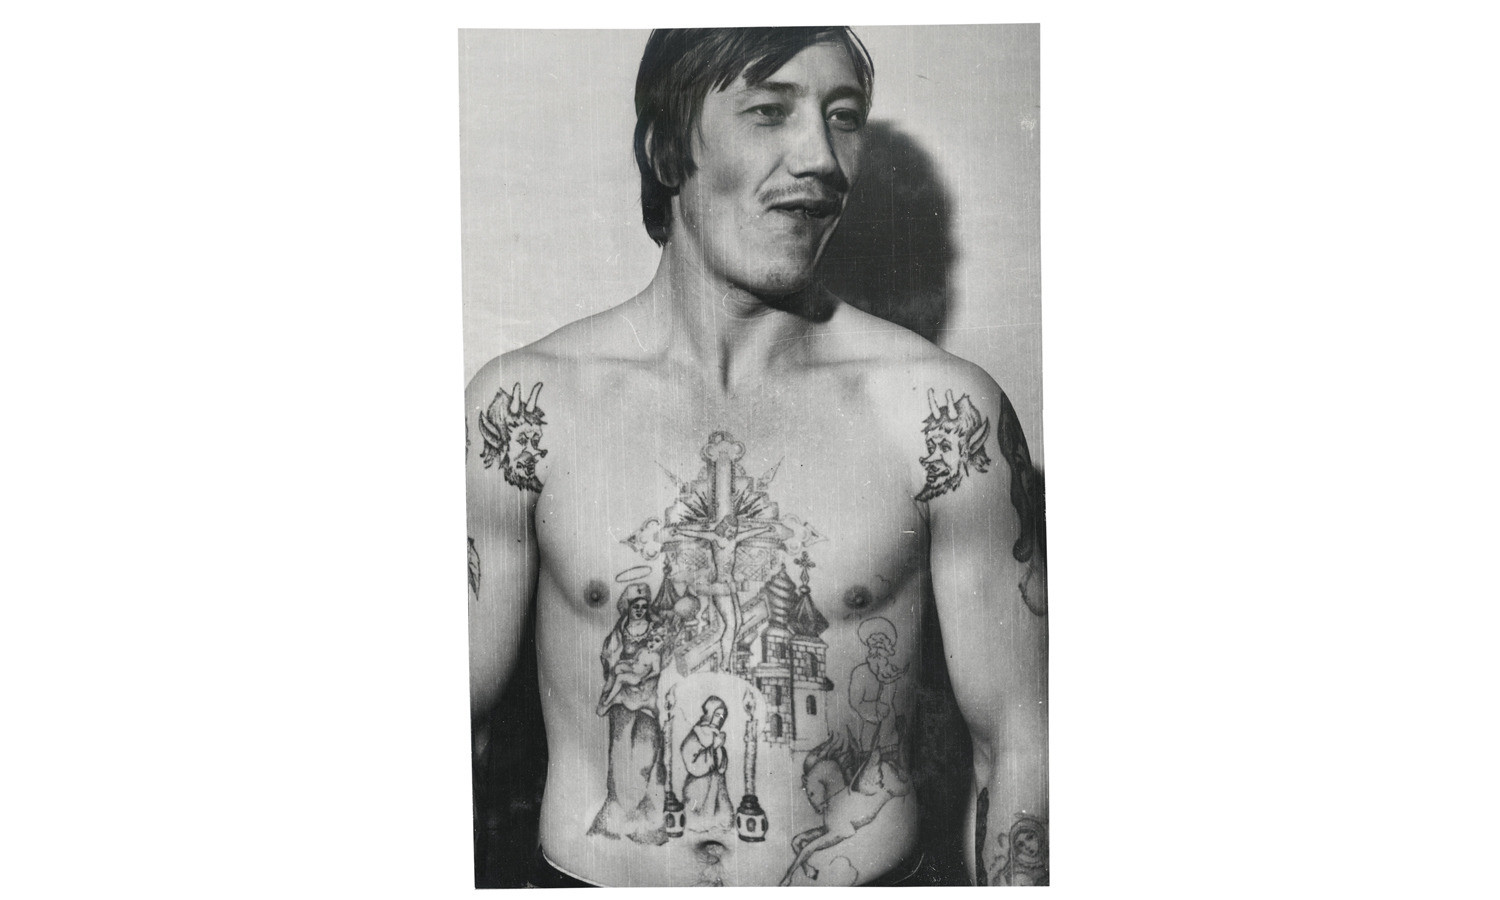 The Visual Encyclopedia of Russian Prison Tattoos - VICE